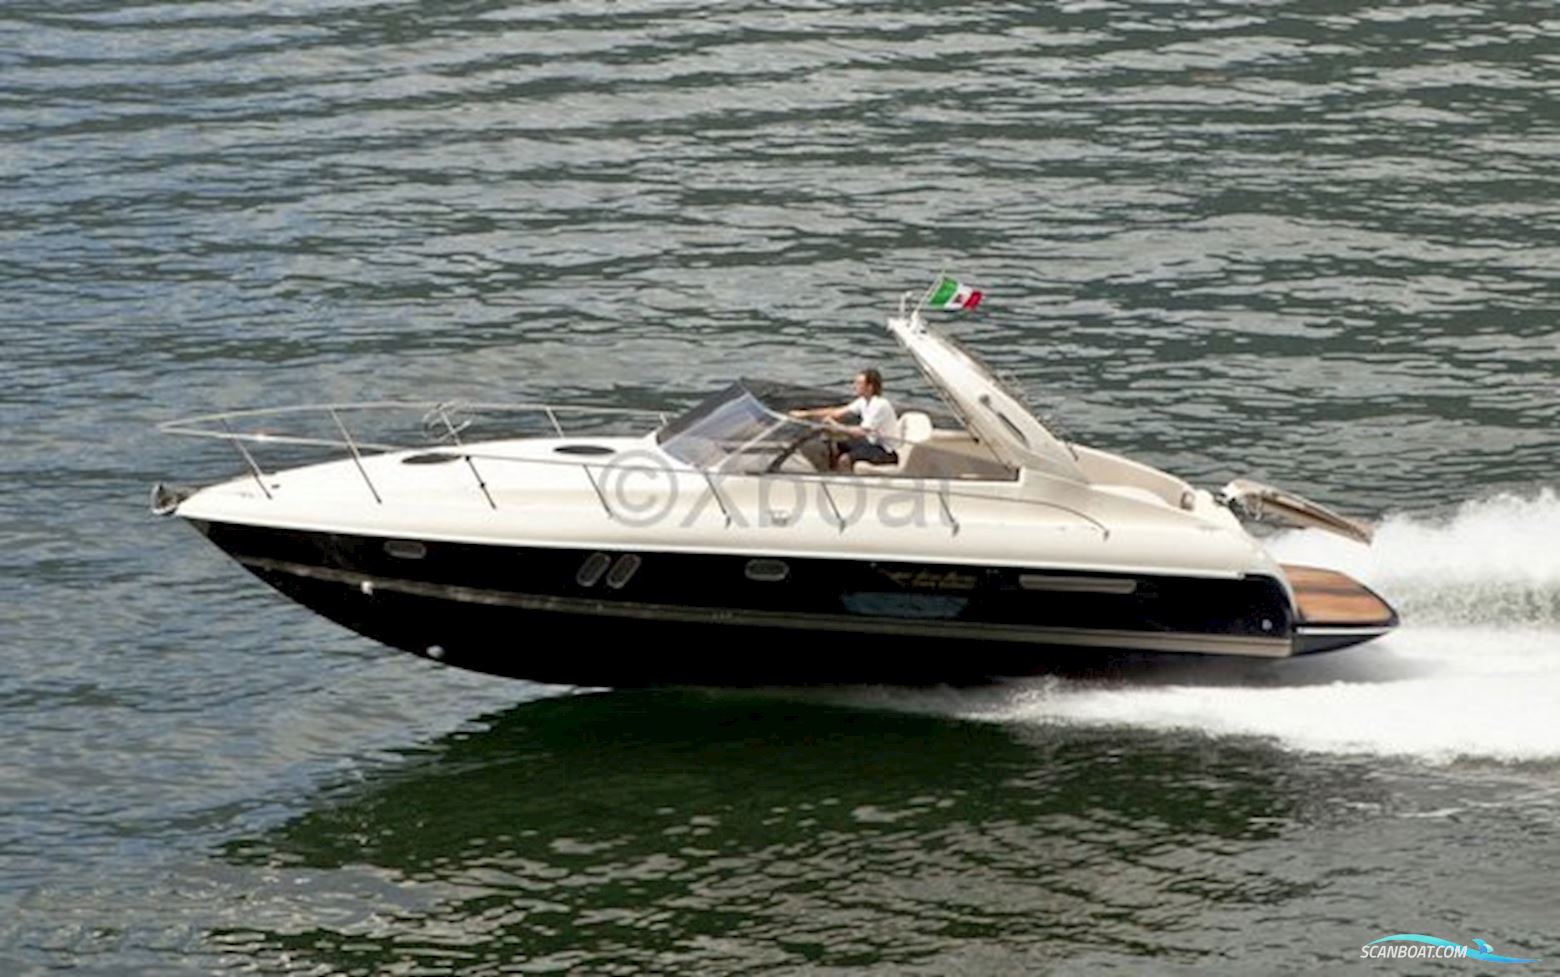 Airon 345 Motor boat 2001, with Volvo Penta engine, France